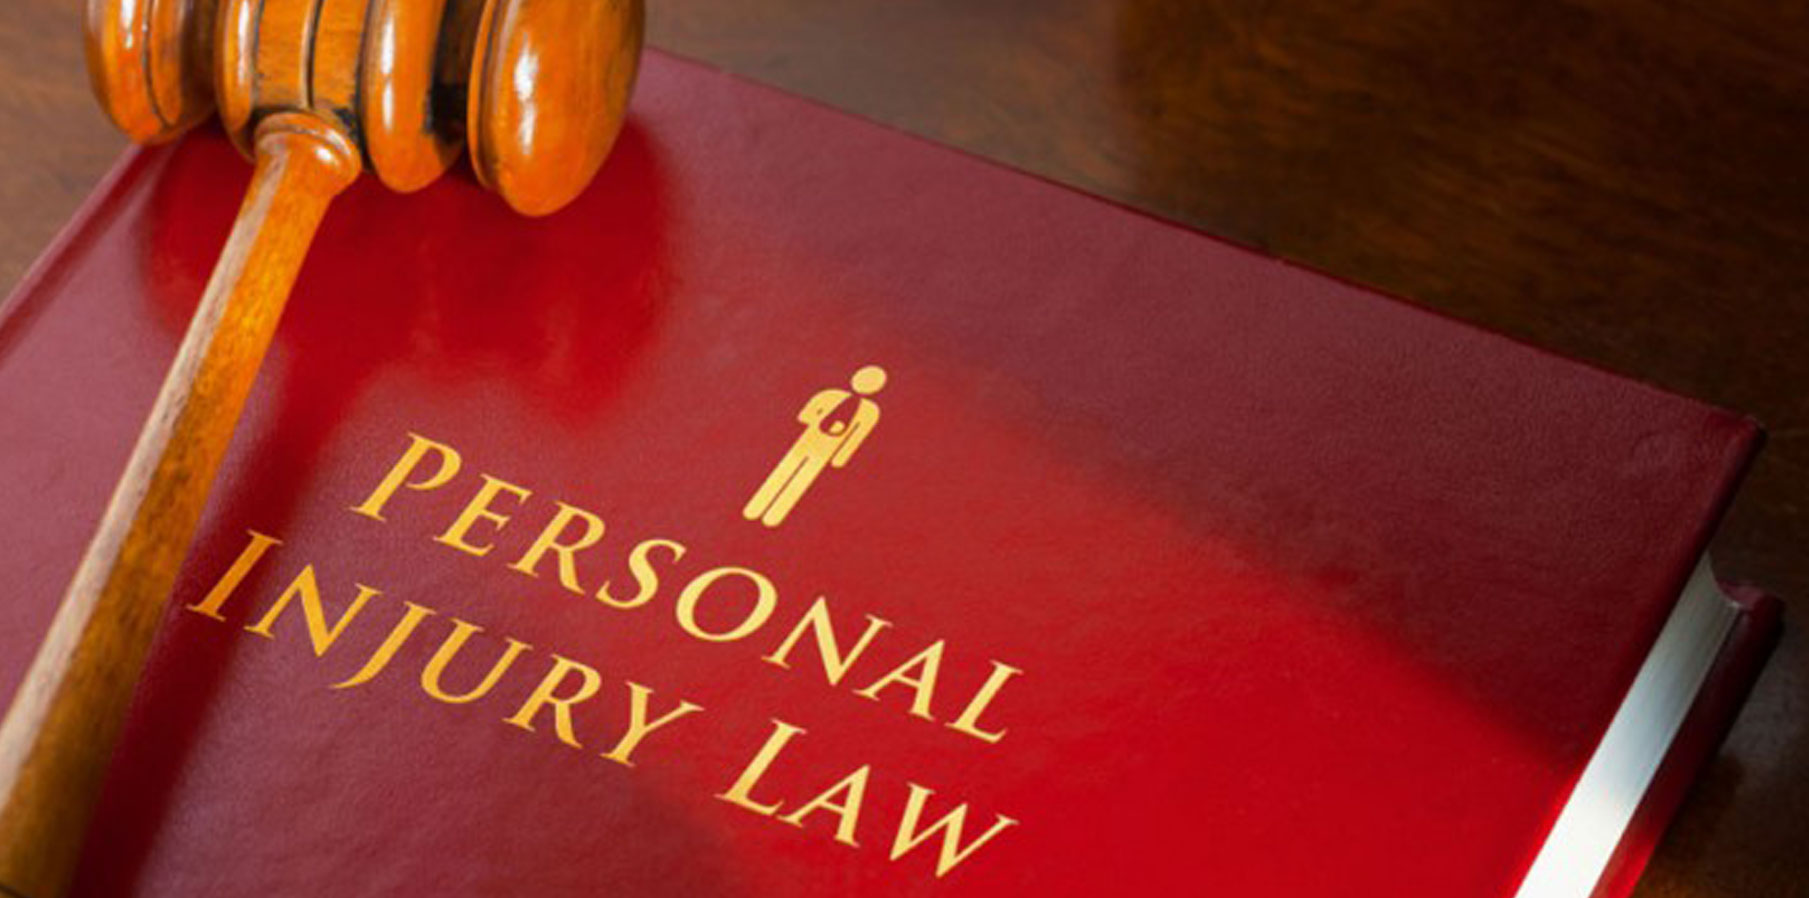 Personal Injury Lawyer: Your Advocate for Justice and Compensation